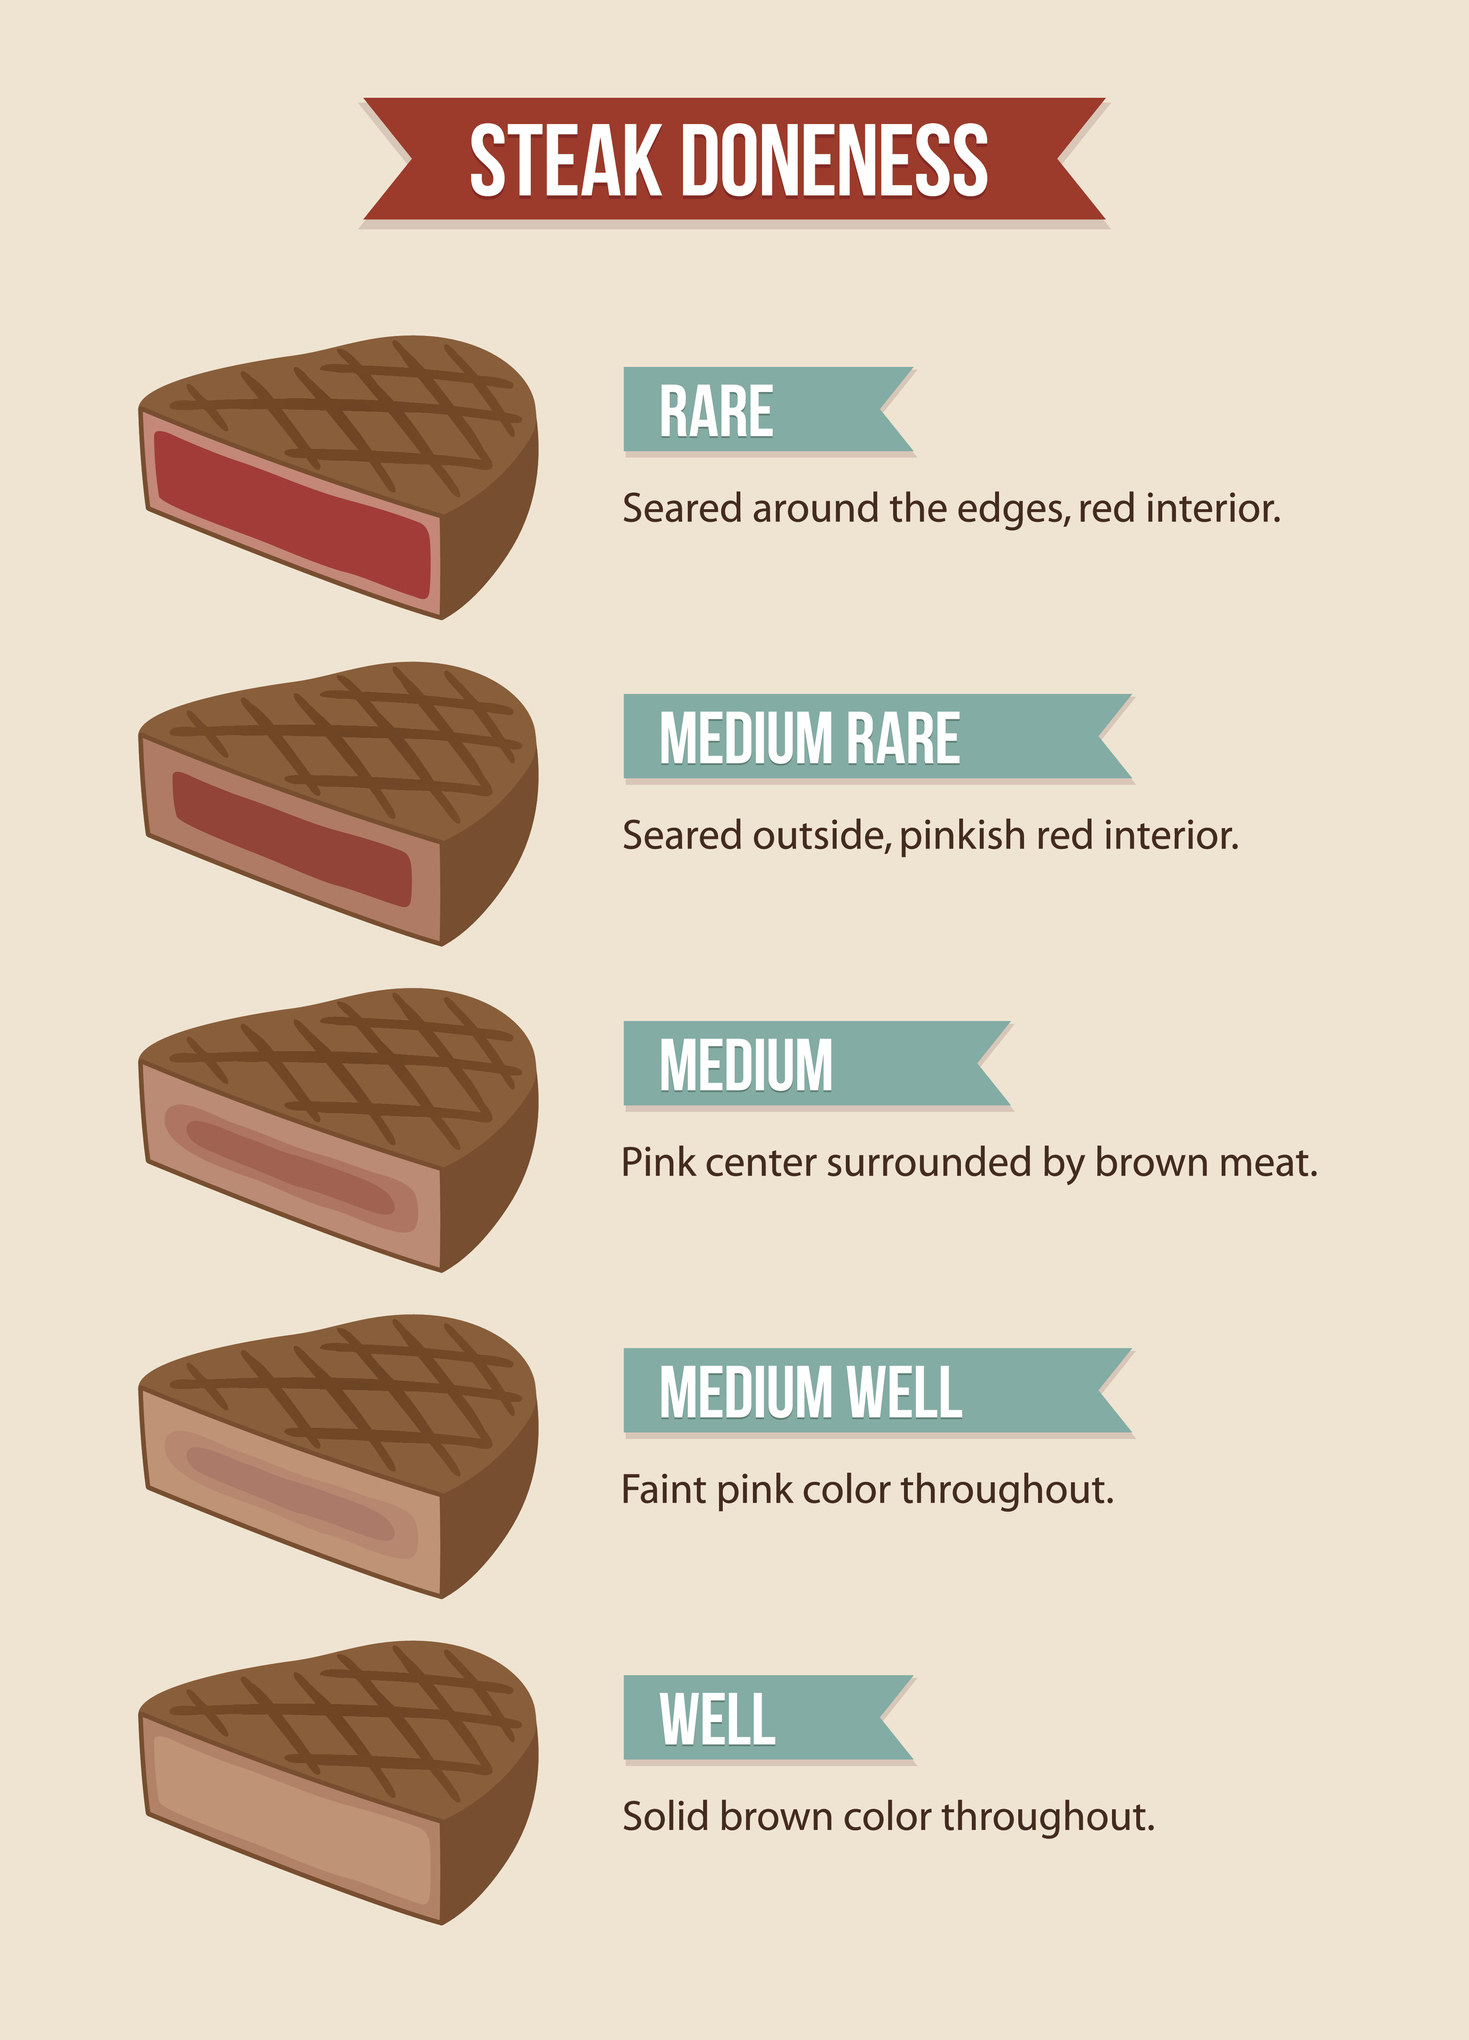 A chart explaining the different levels of done-ness based on the steak&#x27;s color